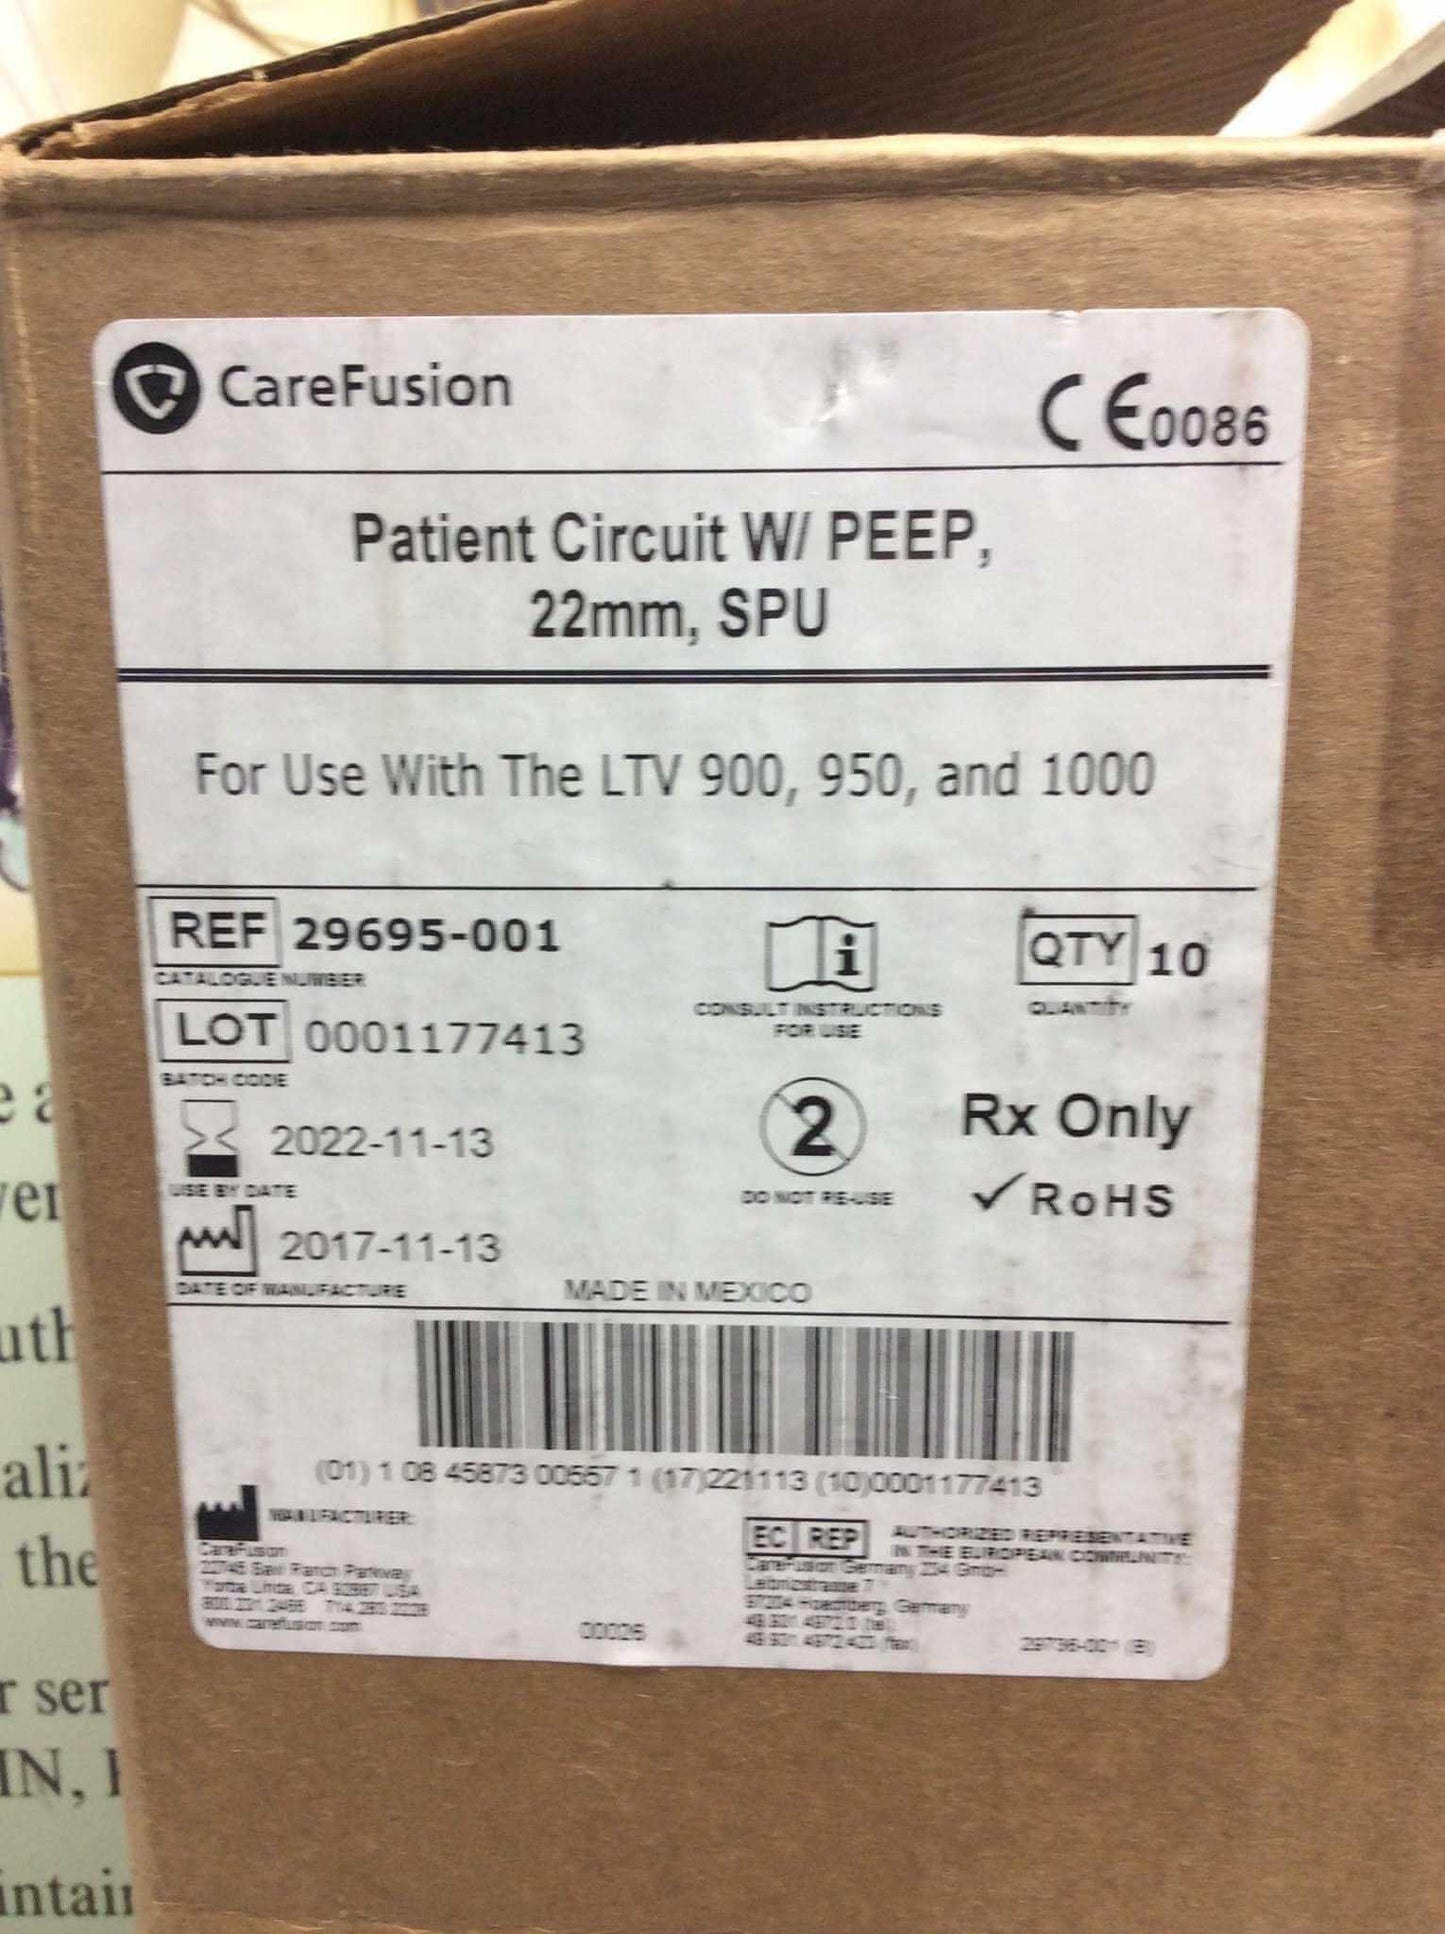 NEW 10PK CareFusion Patient Circuit with PEEP 22mm SPU 29695-001 - MBR Medicals